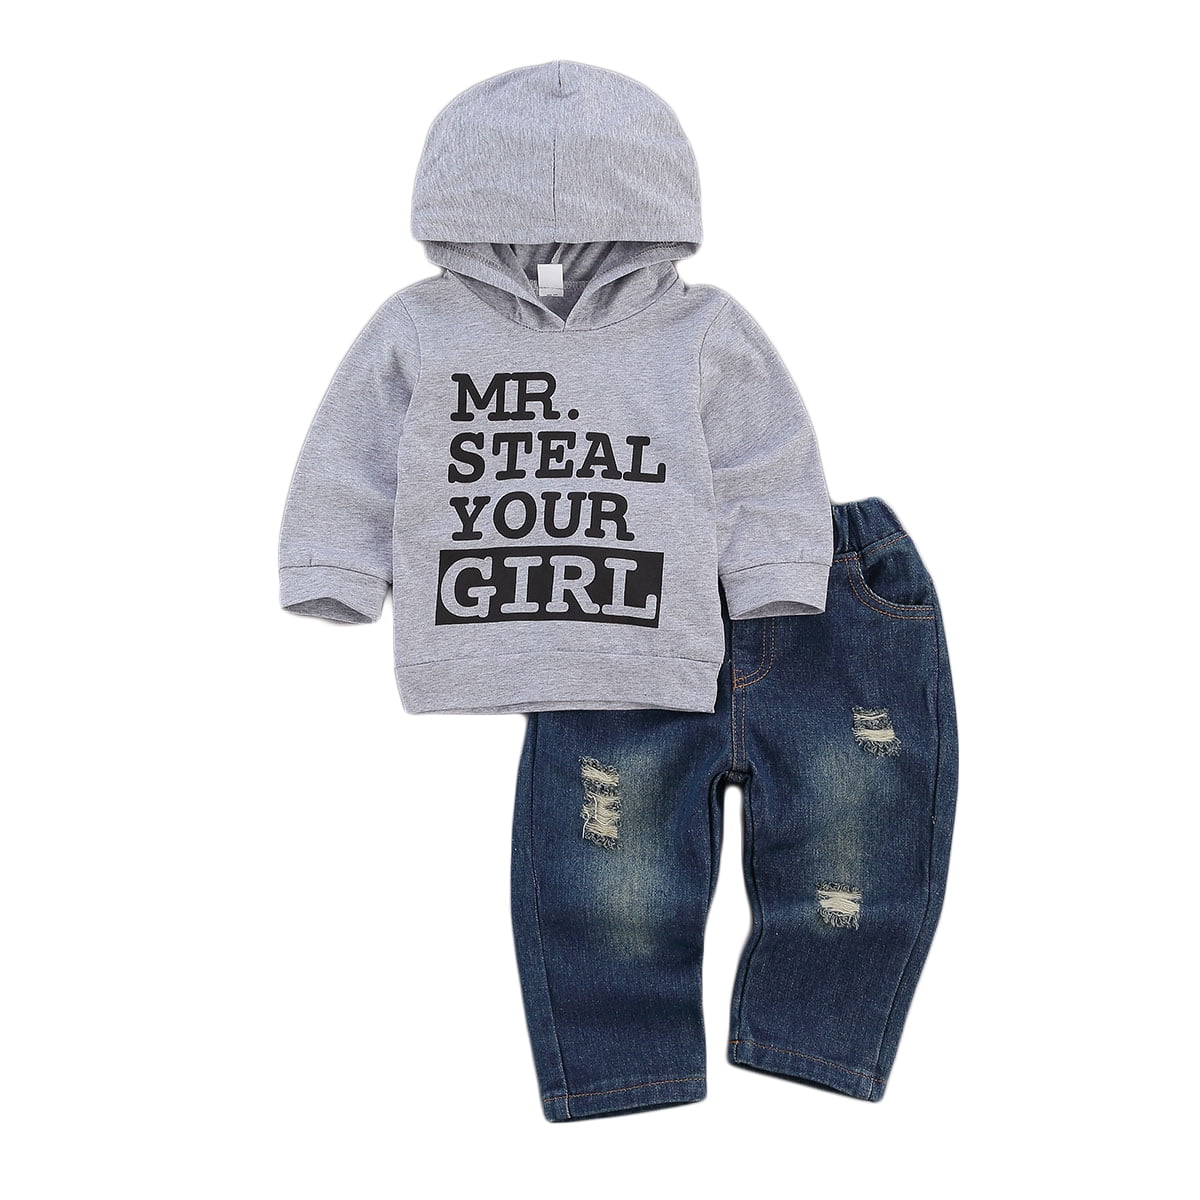 Toddler Infant Baby Boys Hoodie Sweatshirt Pants Outfits Spring Winter Sweatsuits Clothes Sets